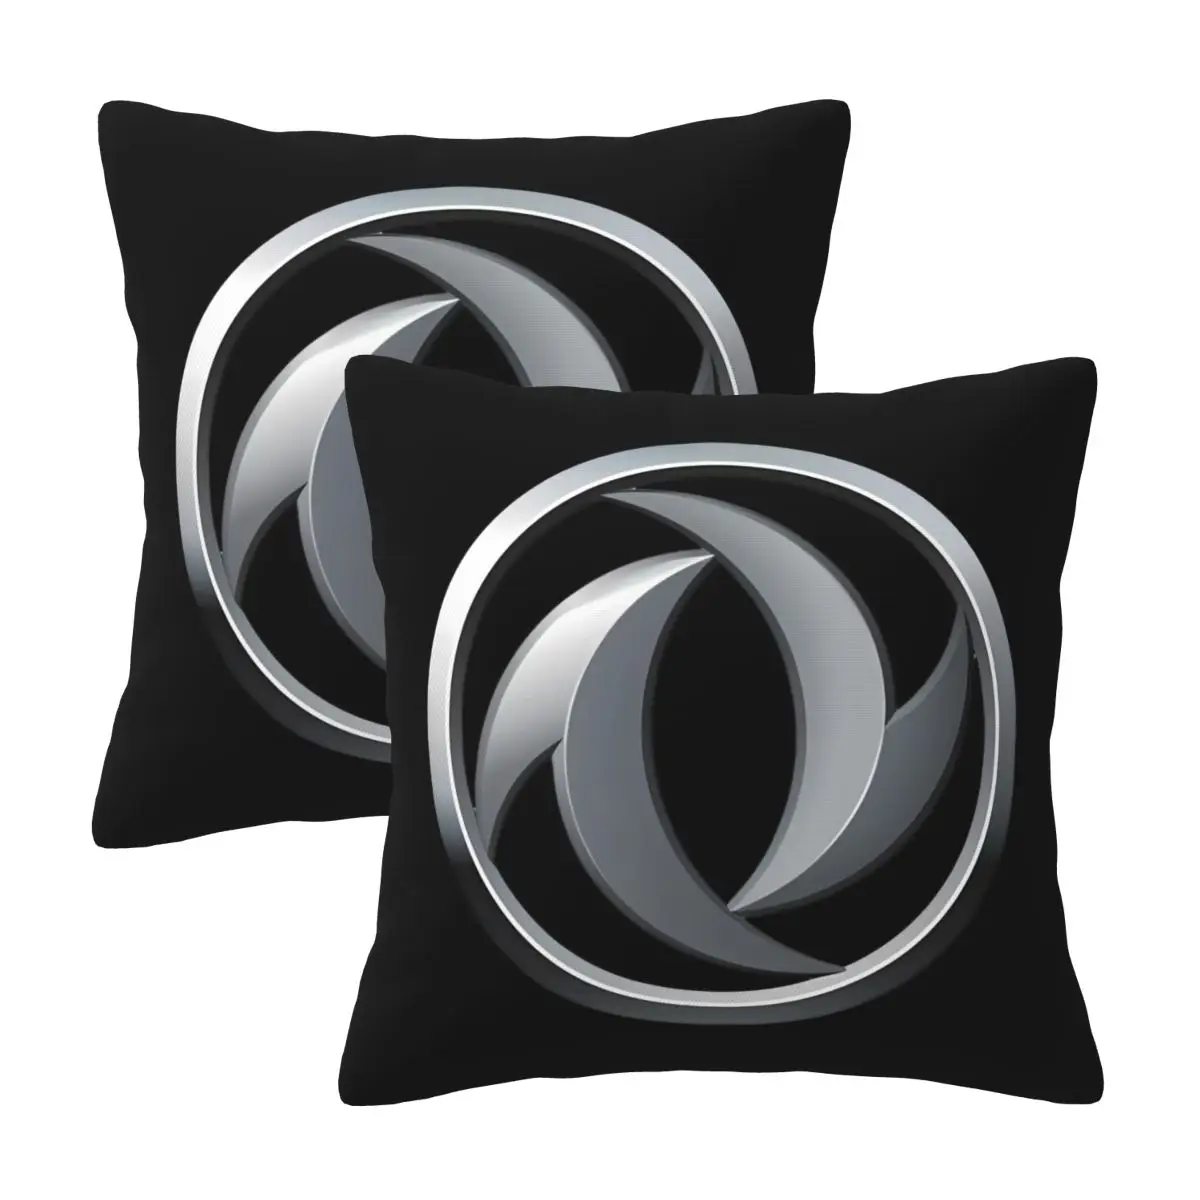 

Dongfeng Fashion Pillowcases Decorative Pillow Covers Soft and Cozy 2 PCS